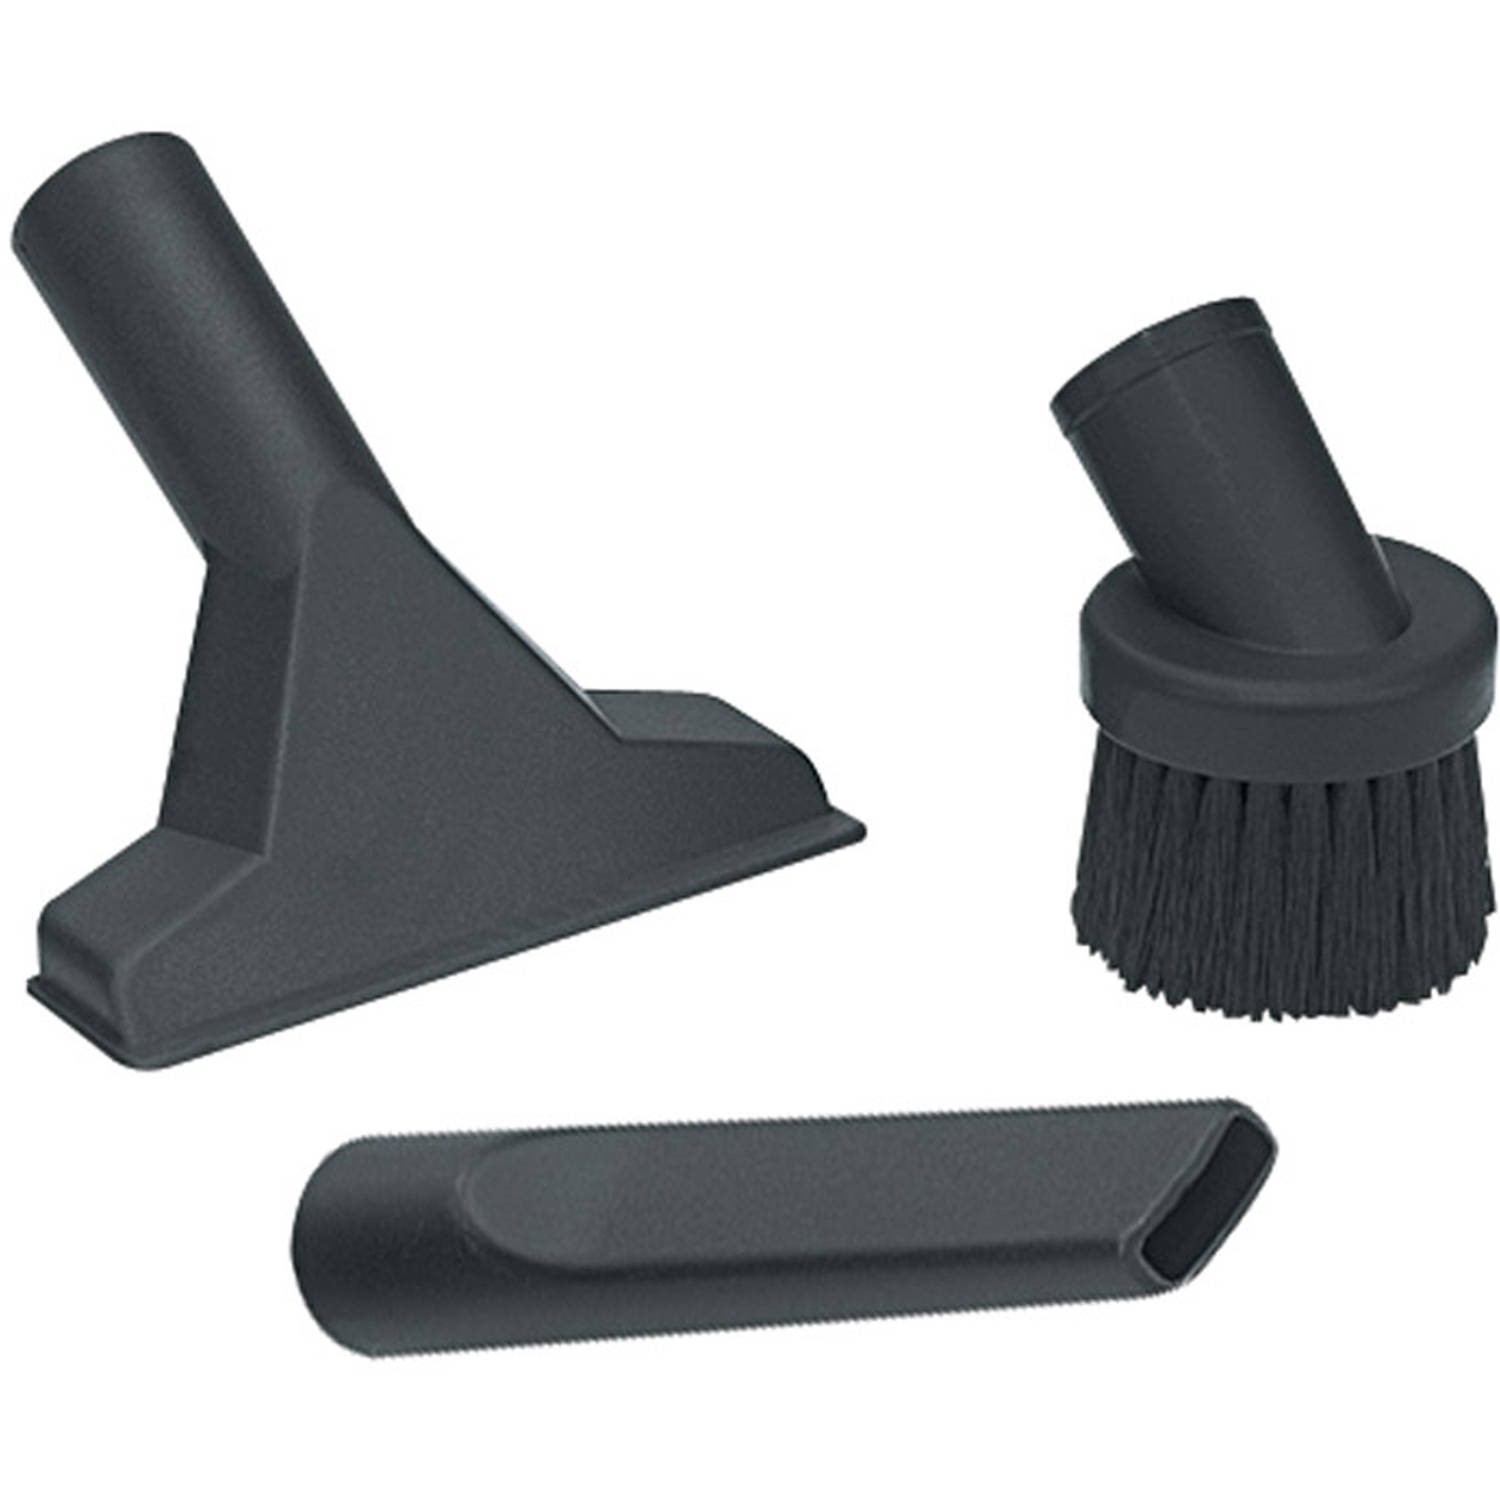 Shop Vac Three Piece 1.25" Cleaning Kit - image 1 of 9